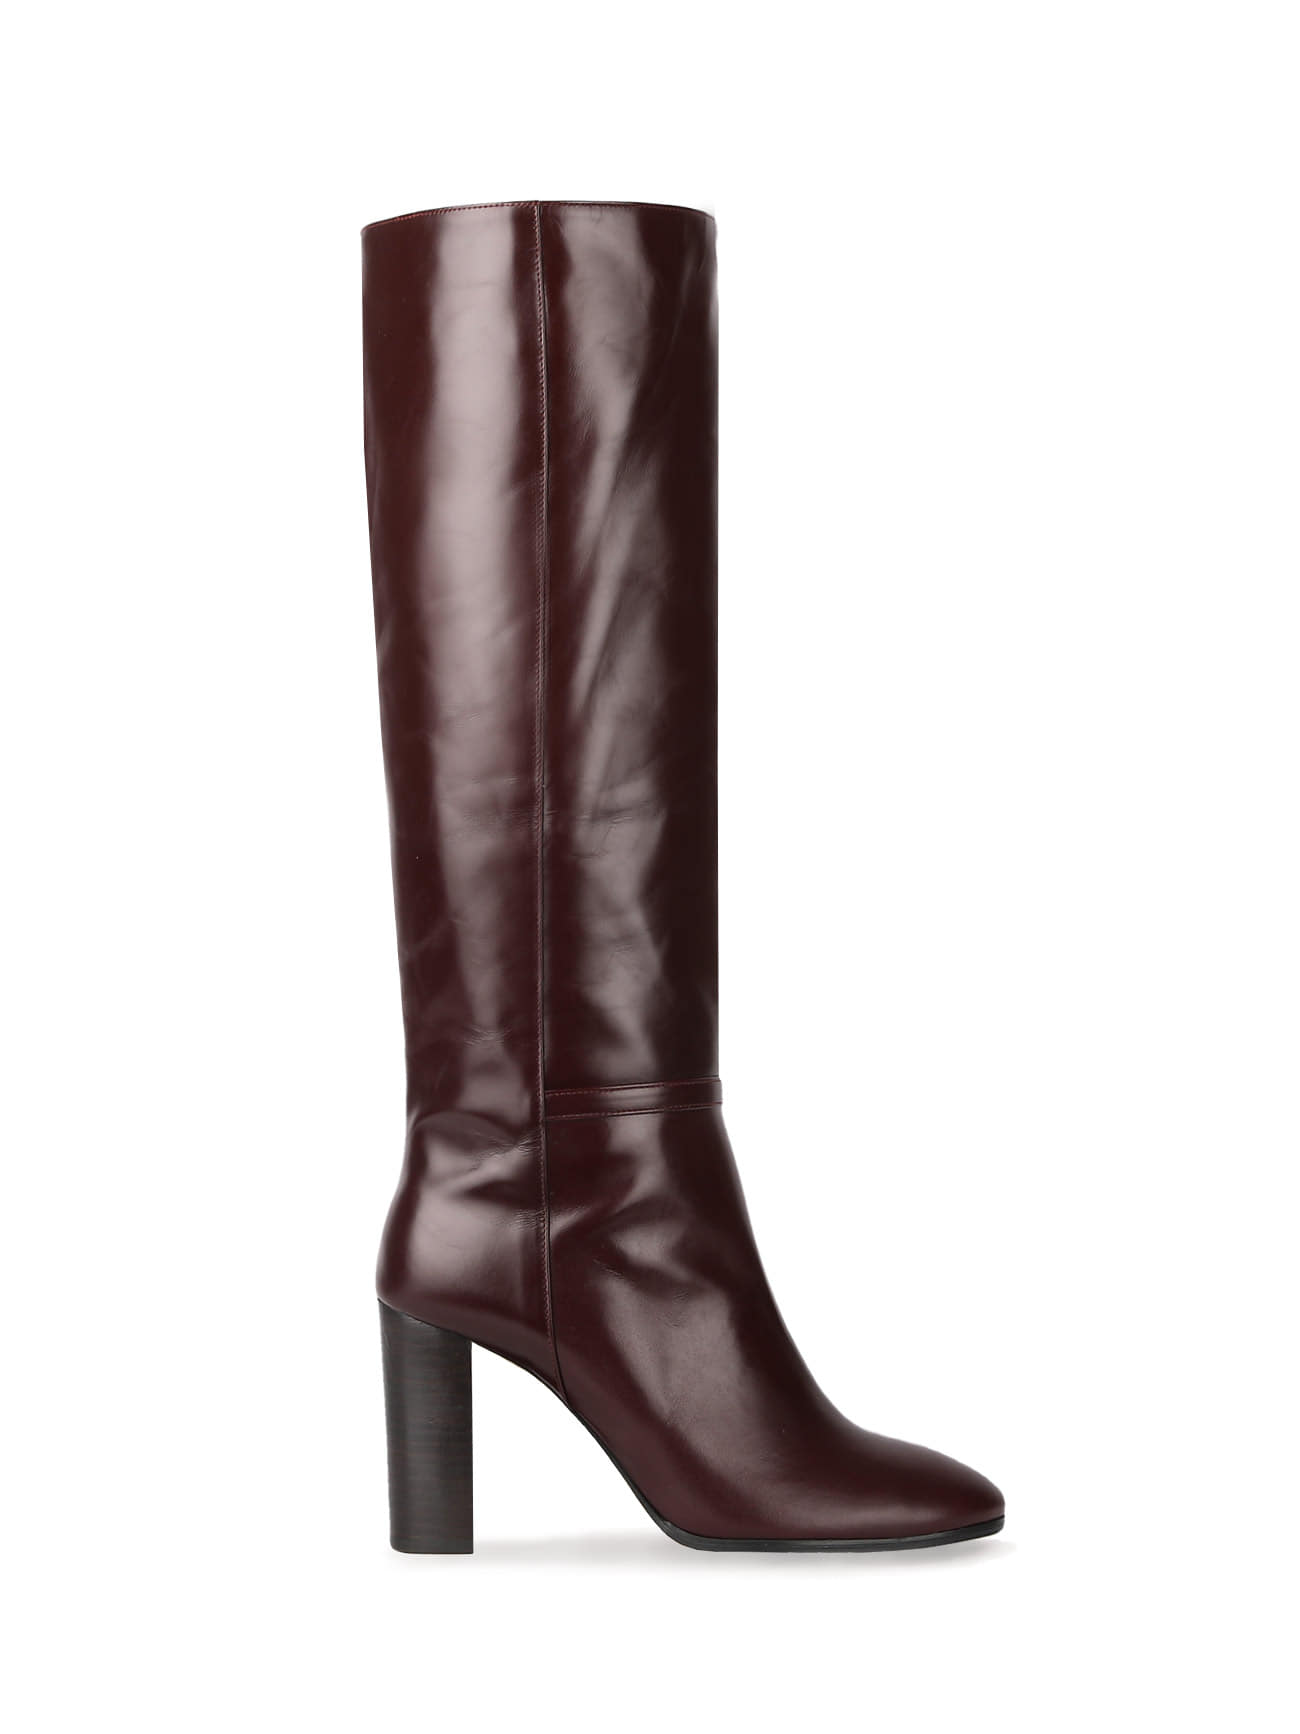 KATE LEATHER KNEE BOOTS - WINE